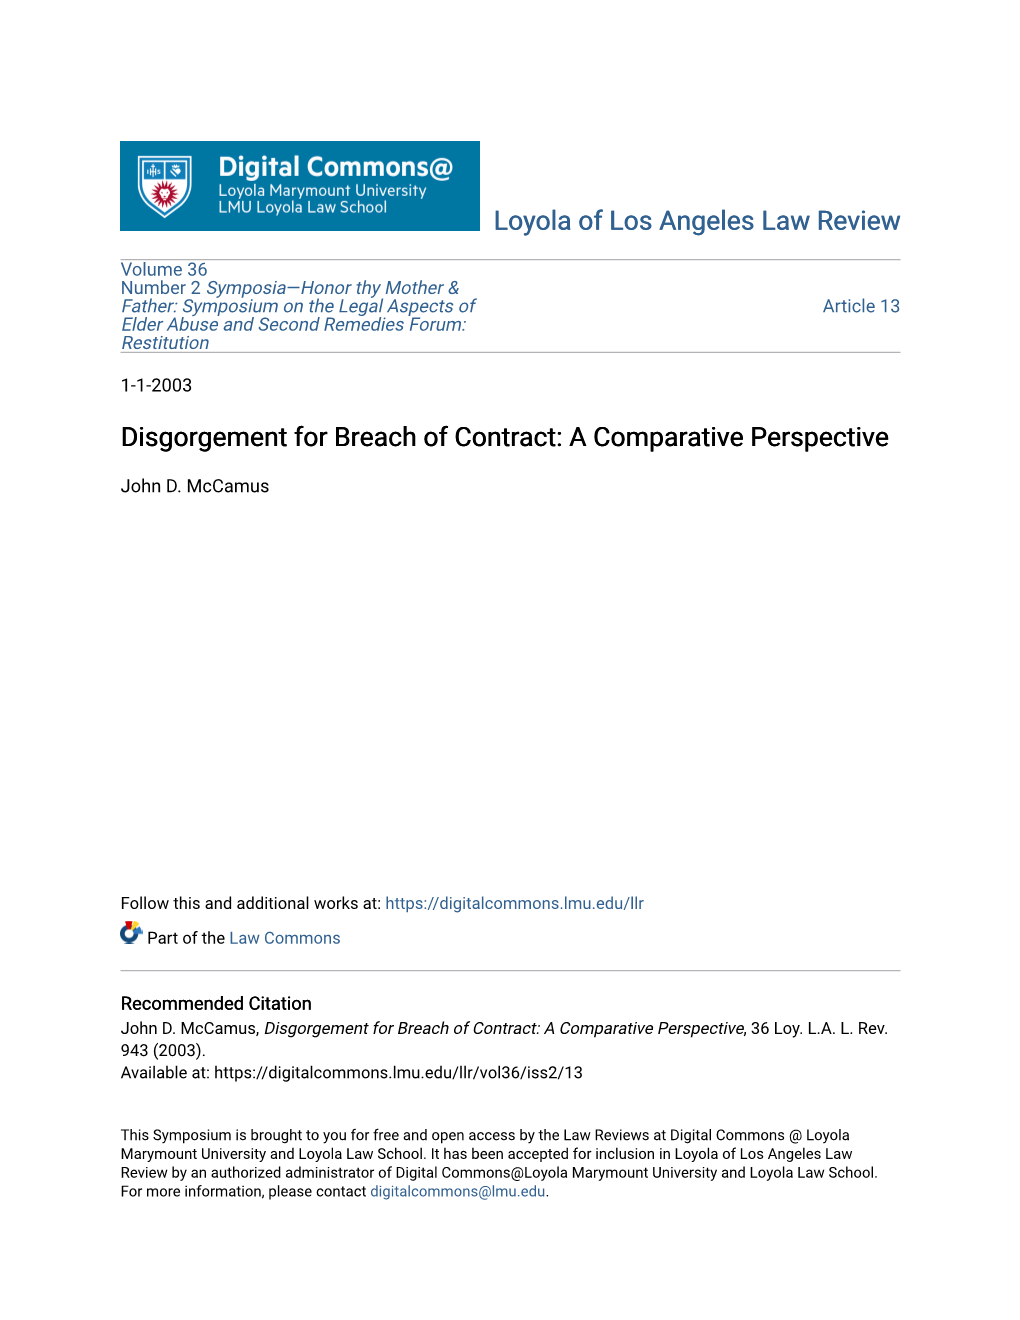 Disgorgement for Breach of Contract: a Comparative Perspective